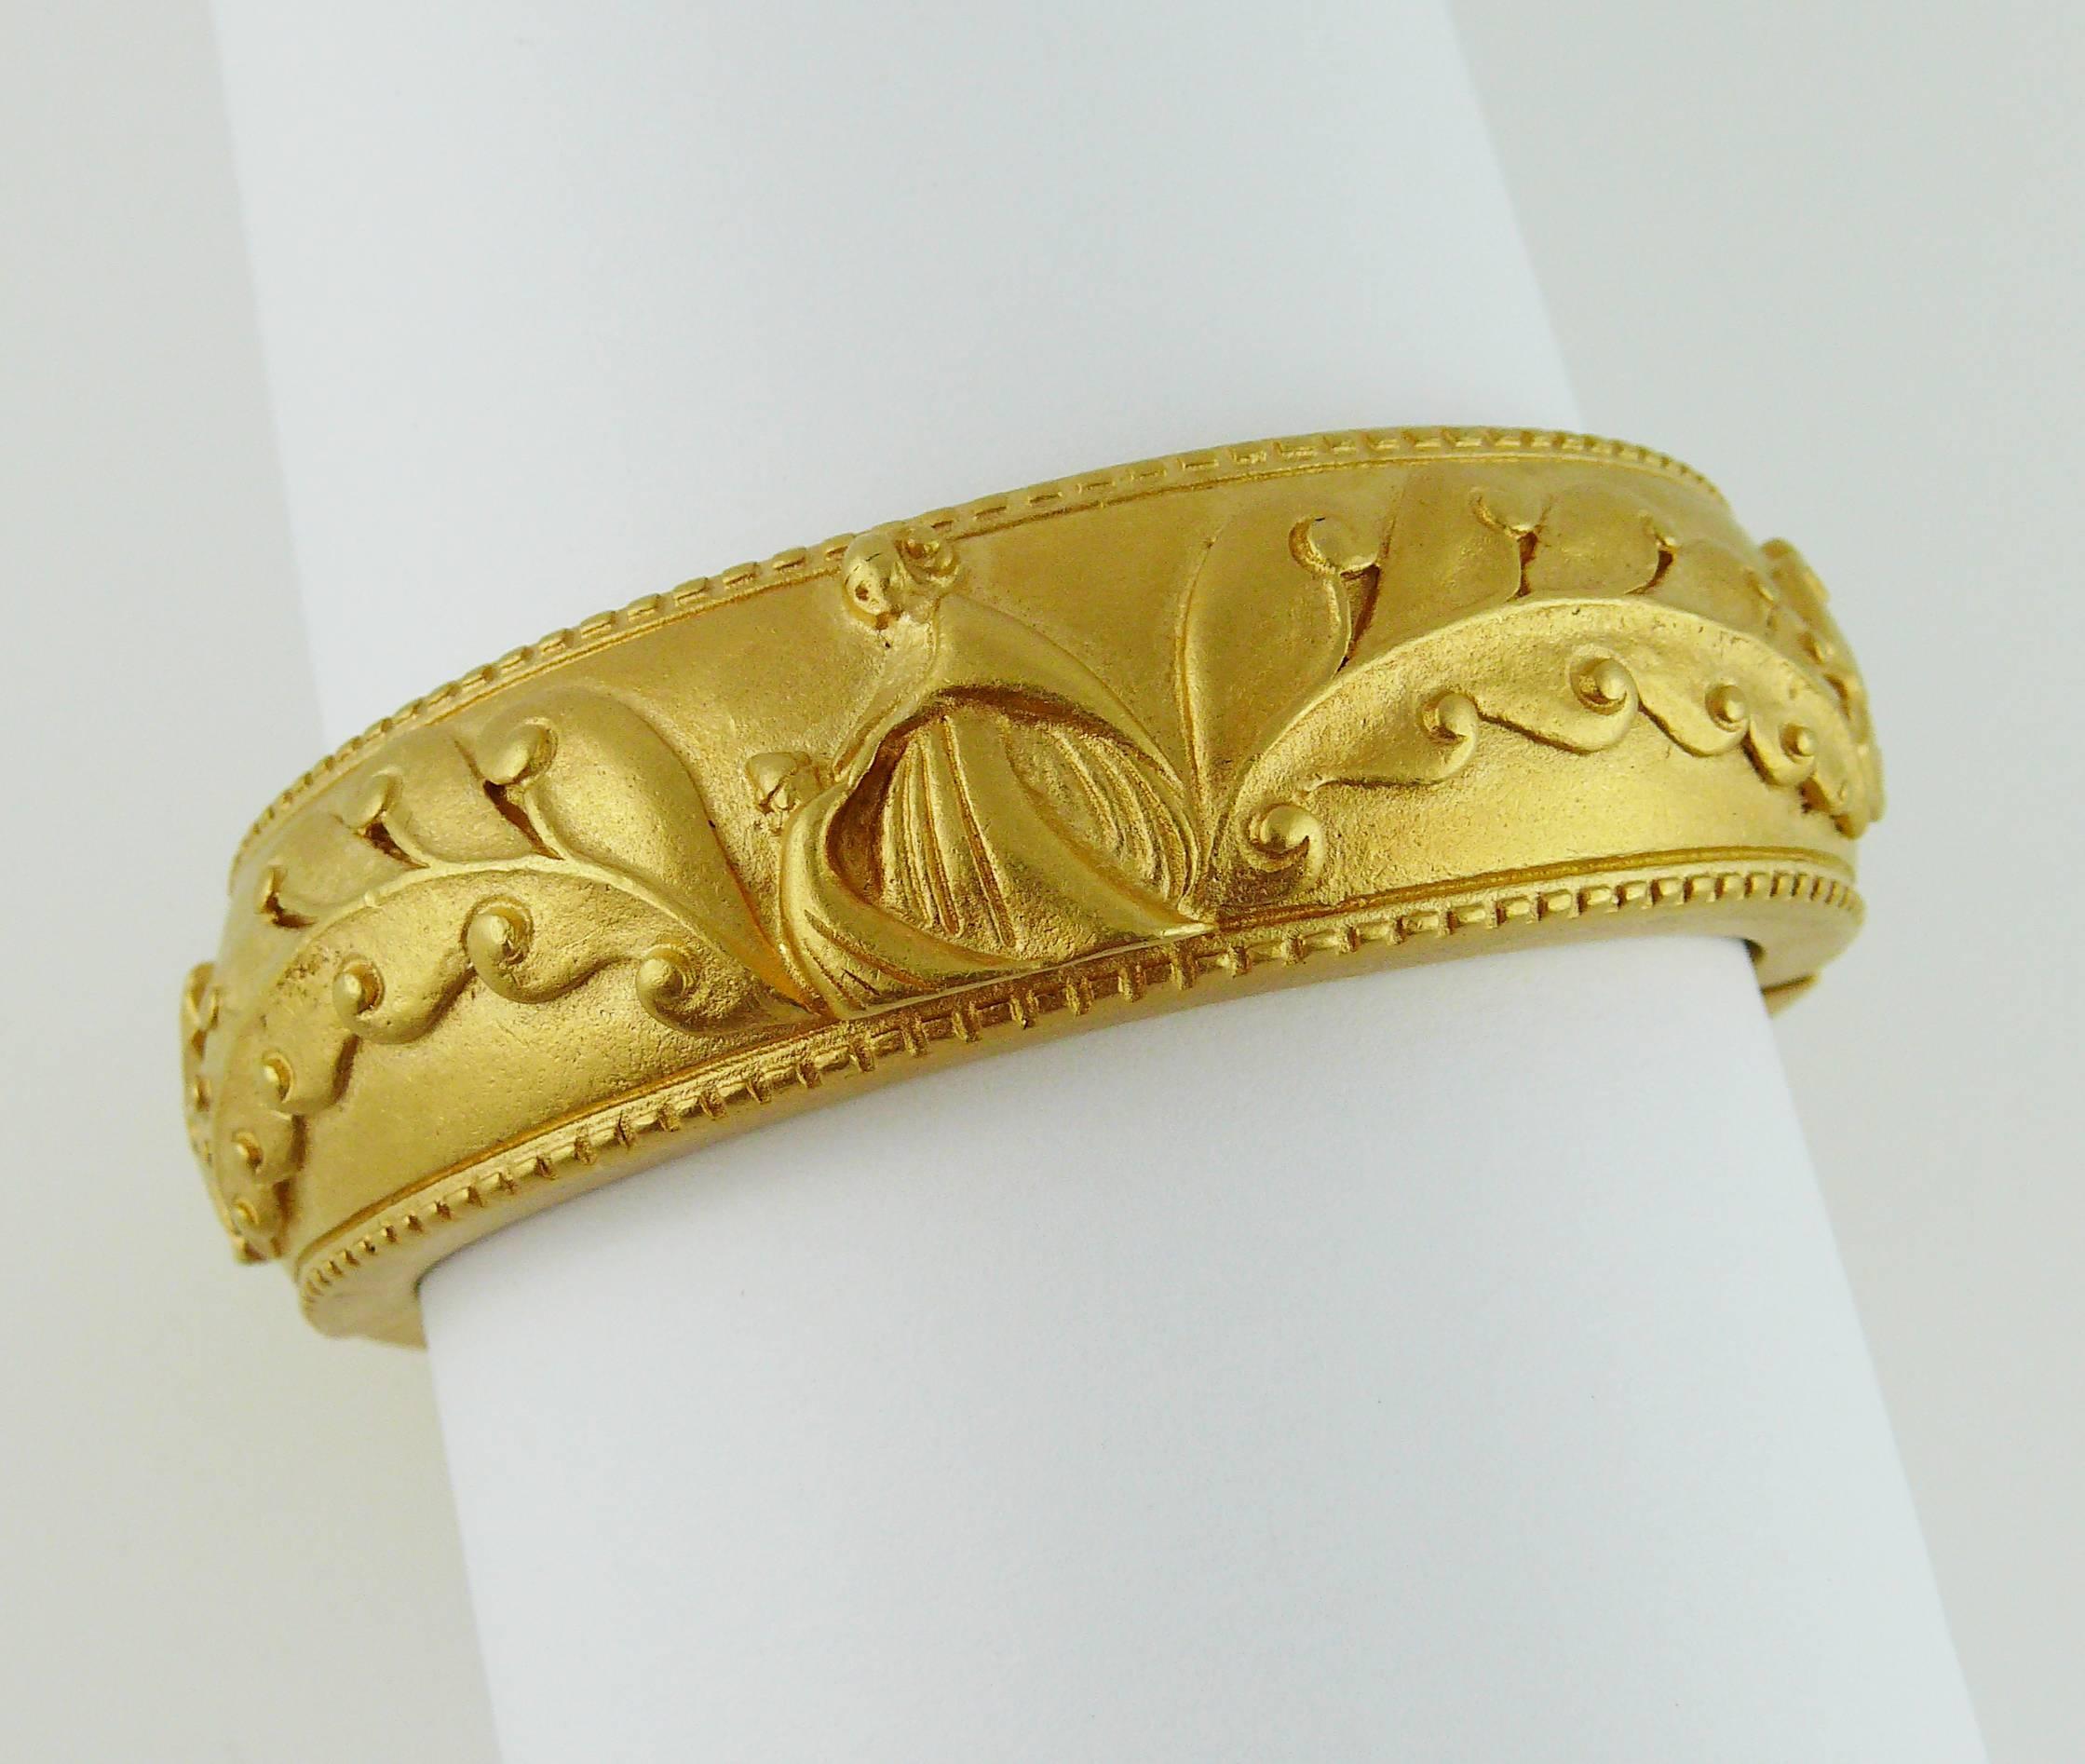 LANVIN vintage matte gold toned bracelet created for the promotion of ARPEGE perfume.

This bracelet features a gorgeous Art Deco stylized floral design with PAUL IRIBE's JEANNE LANVIN and daughter logo.

Marked LANVIN Parfums.

Indicative